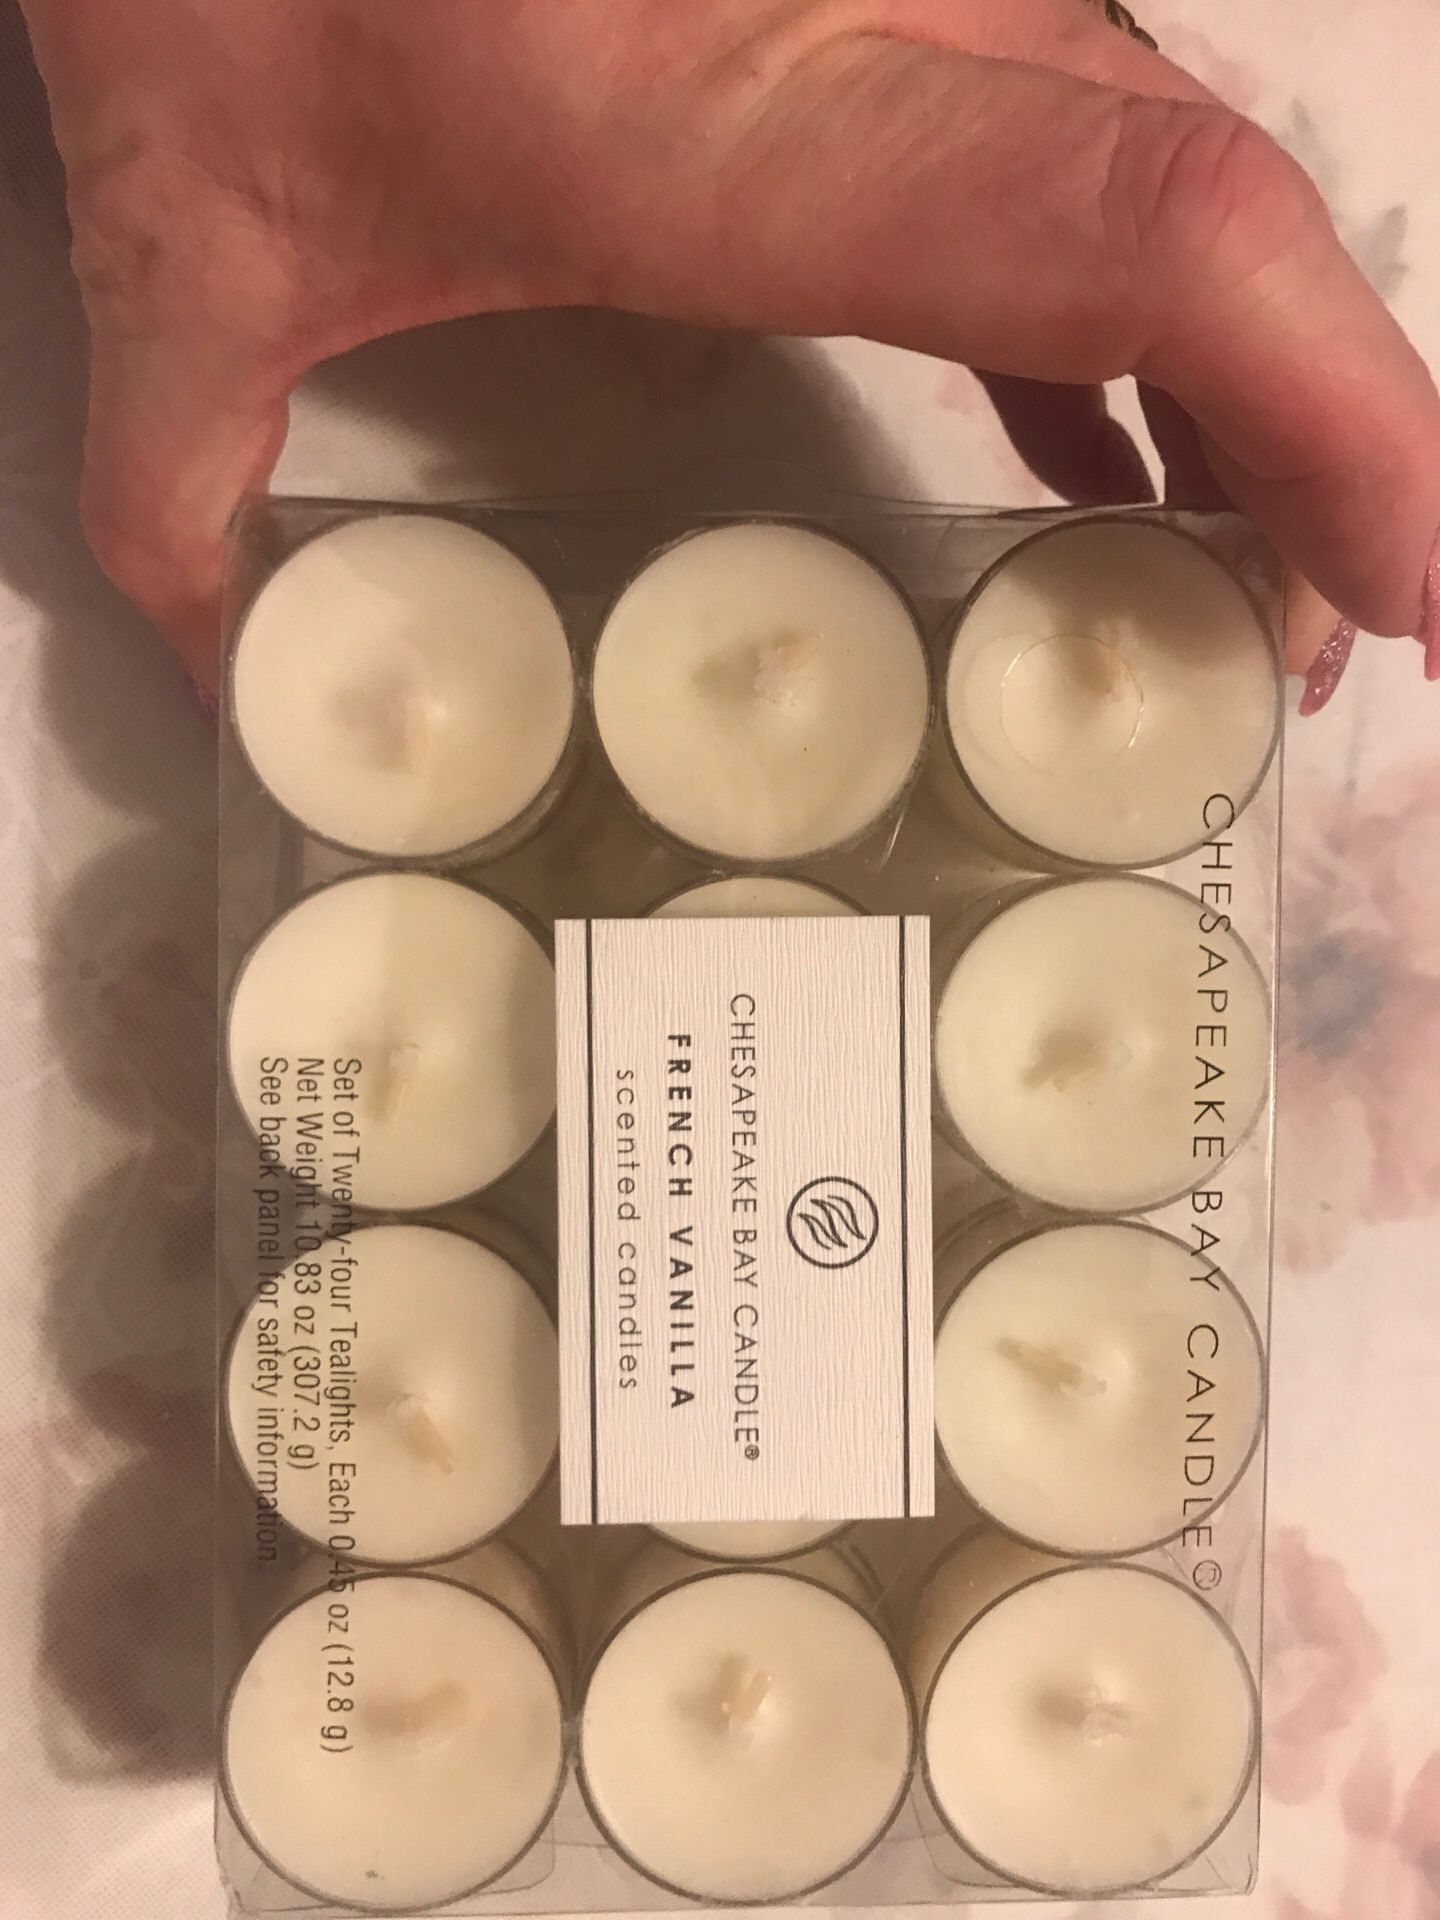 French Vanilla scented candles/24 tea lights by Chesapeake Bay Candle